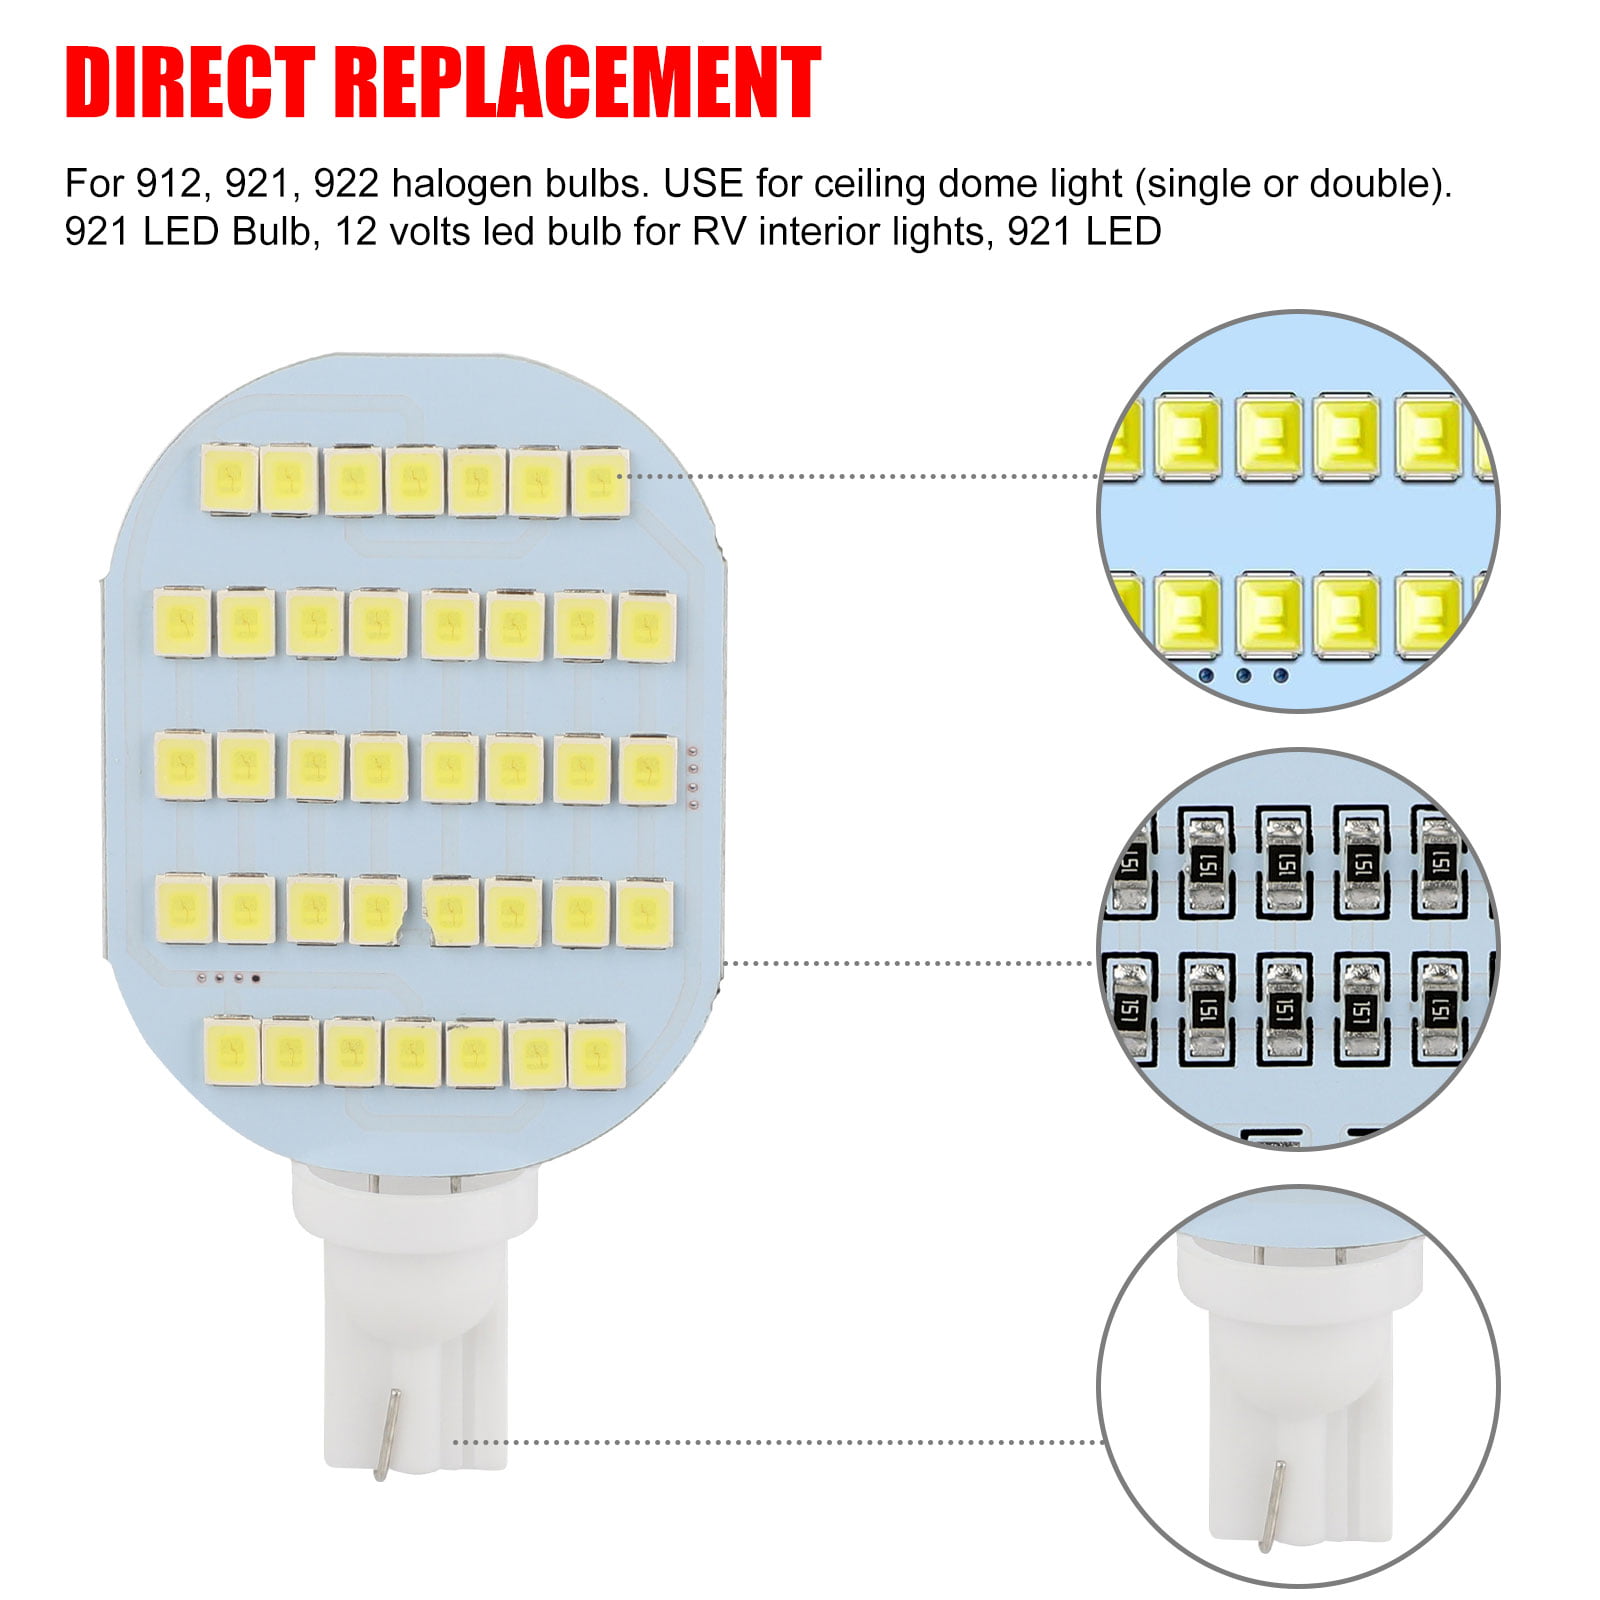 T10 168 912 LED Bulbs Replacement for Camper Trailer Motorhome Marine Boat Indoor Ceiling Dome Map License Lights,Backup Reverse Lights AOICANKI 921 194 Interior LED Light Bulbs for RV White, 20 